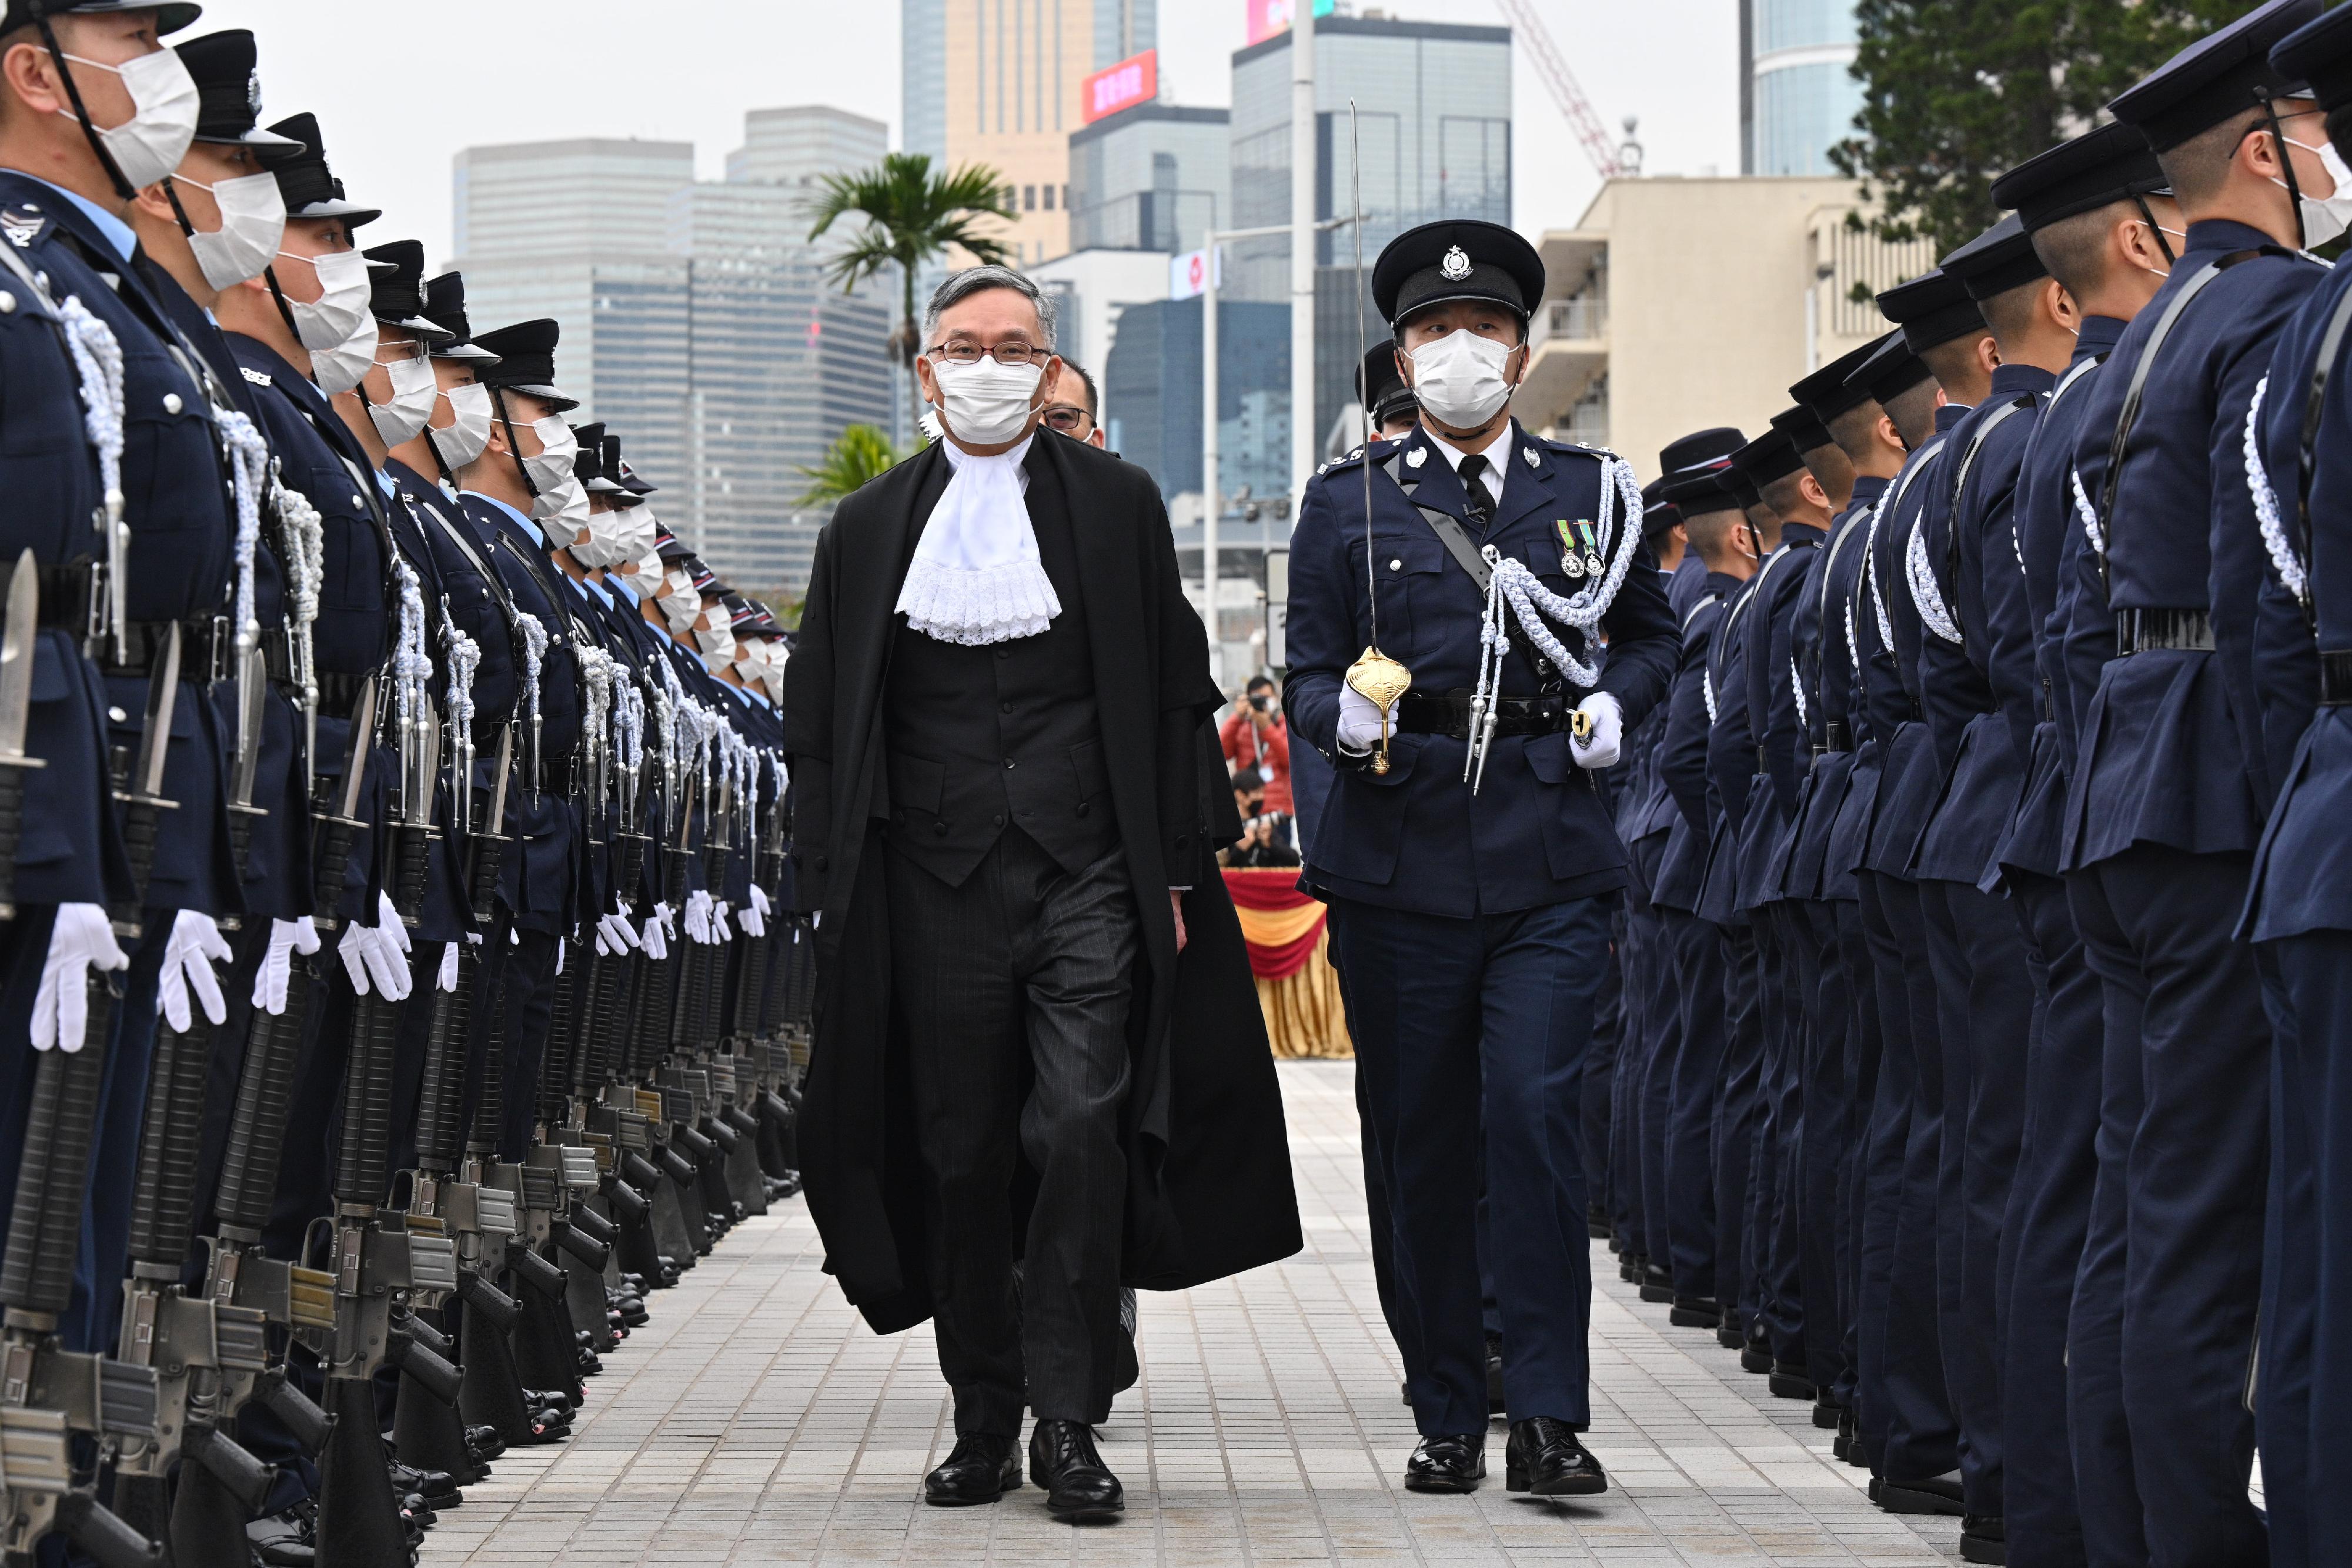 The Chief Justice of the Court of Final Appeal, Mr Andrew Cheung Kui-nung, inspects a Ceremonial Guard mounted by the Hong Kong Police Force at Edinburgh Place during the Ceremonial Opening of the Legal Year 2023 today (January 16).